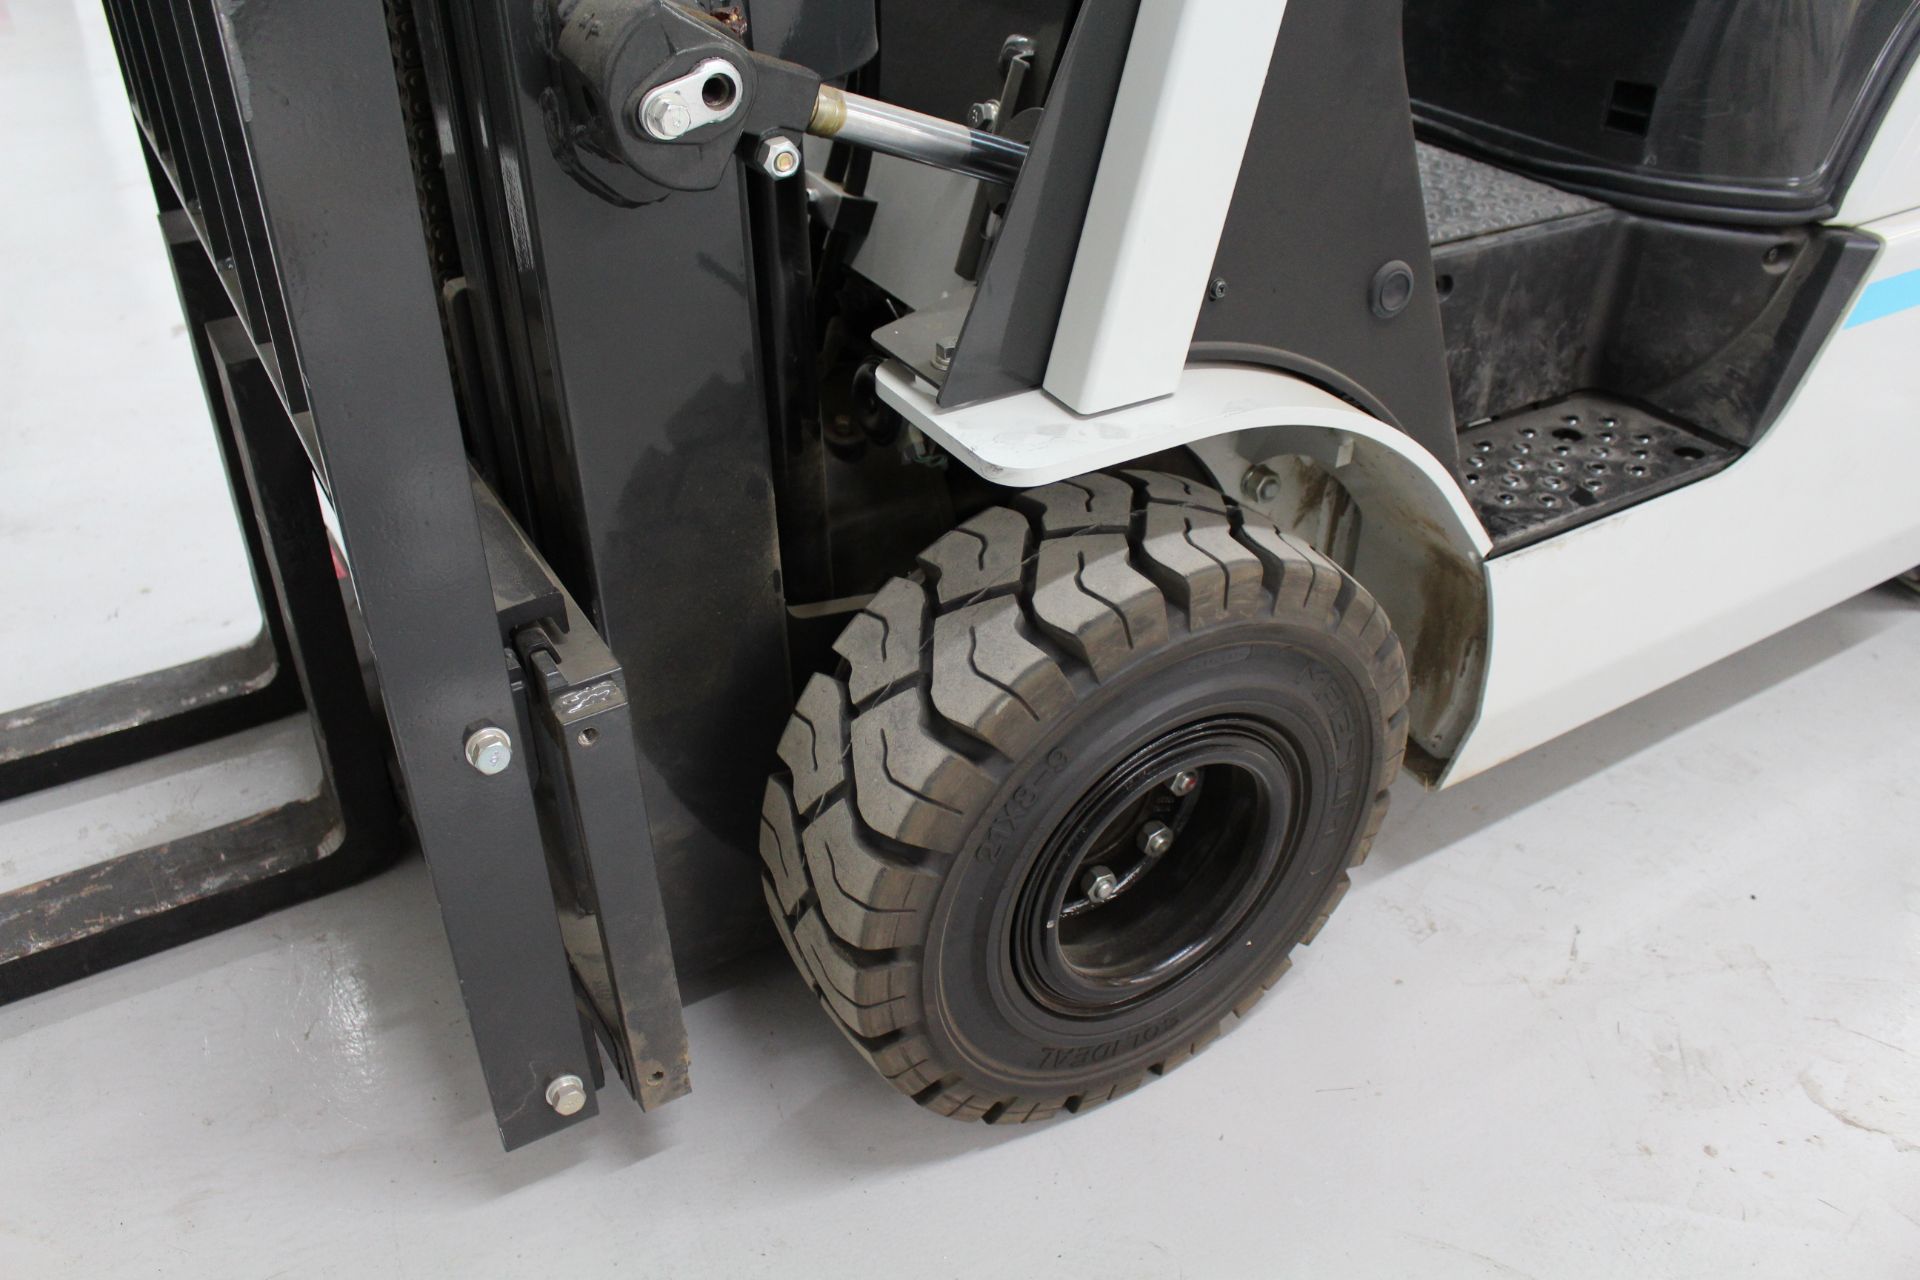 2015 NISSAN FORK LIFT MODEL MAP1F2A25LV, 5000 LBS CAP., PROPANE, SOLID TIRES, SIDE SHIFT, 3 STAGE, - Image 10 of 16